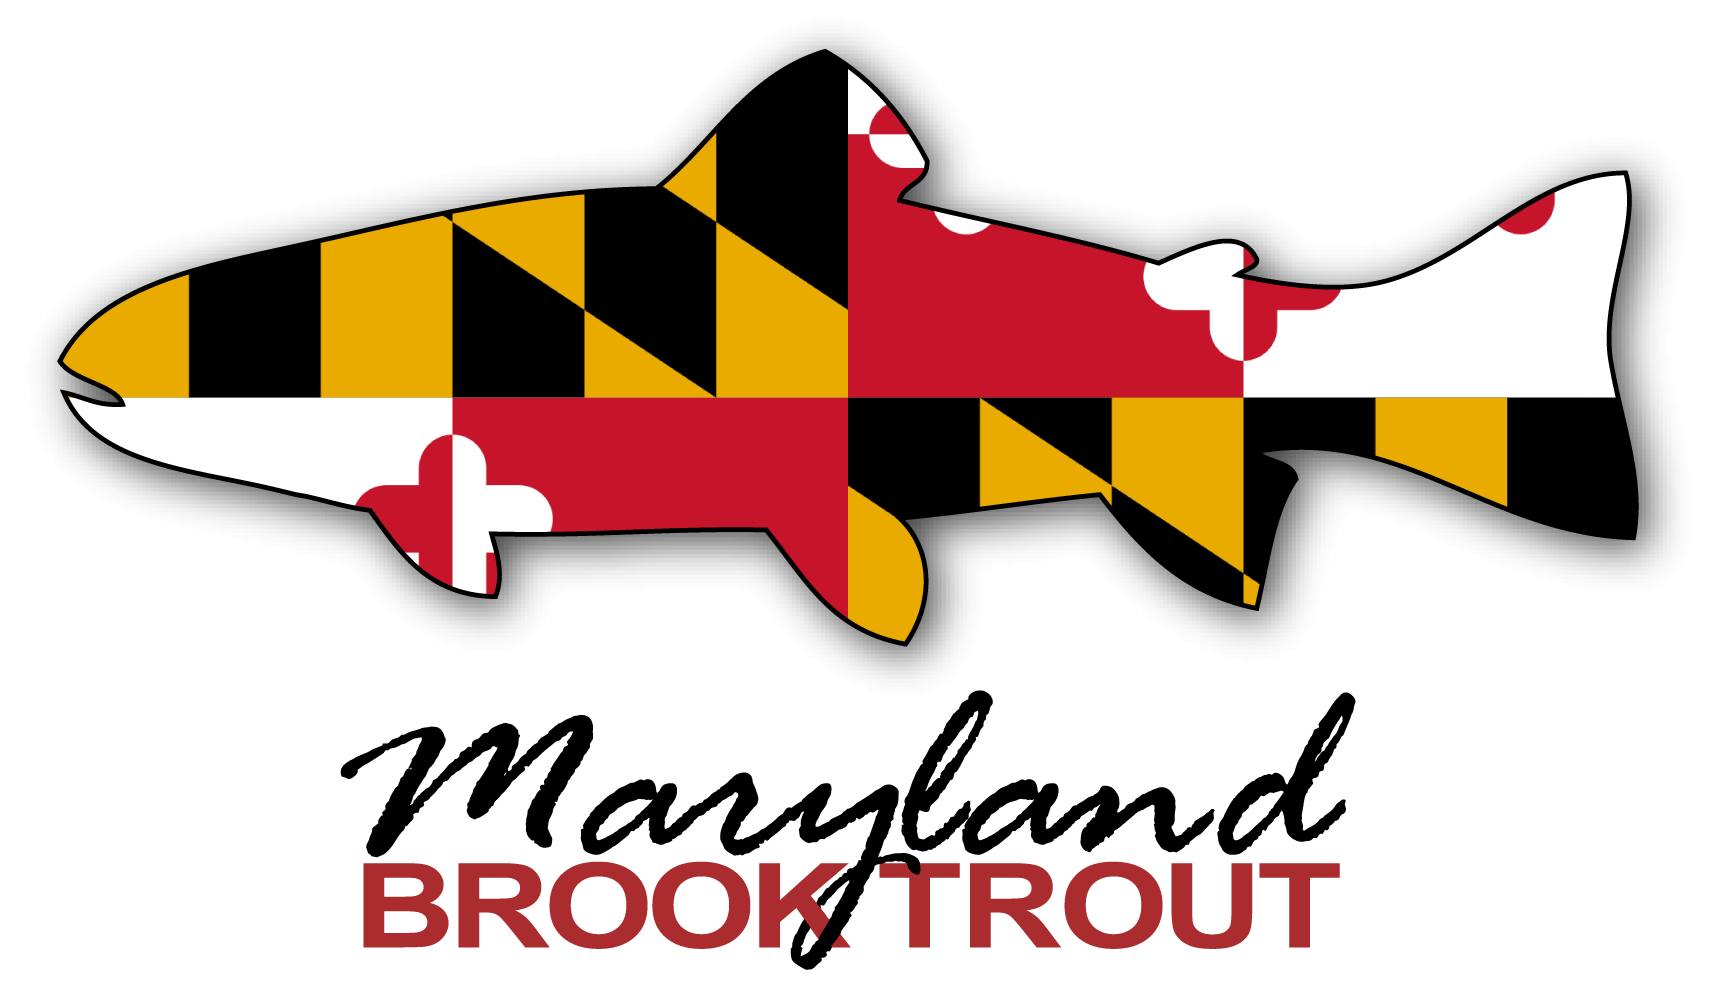 Salmon clipart brook trout. Management maryland logo